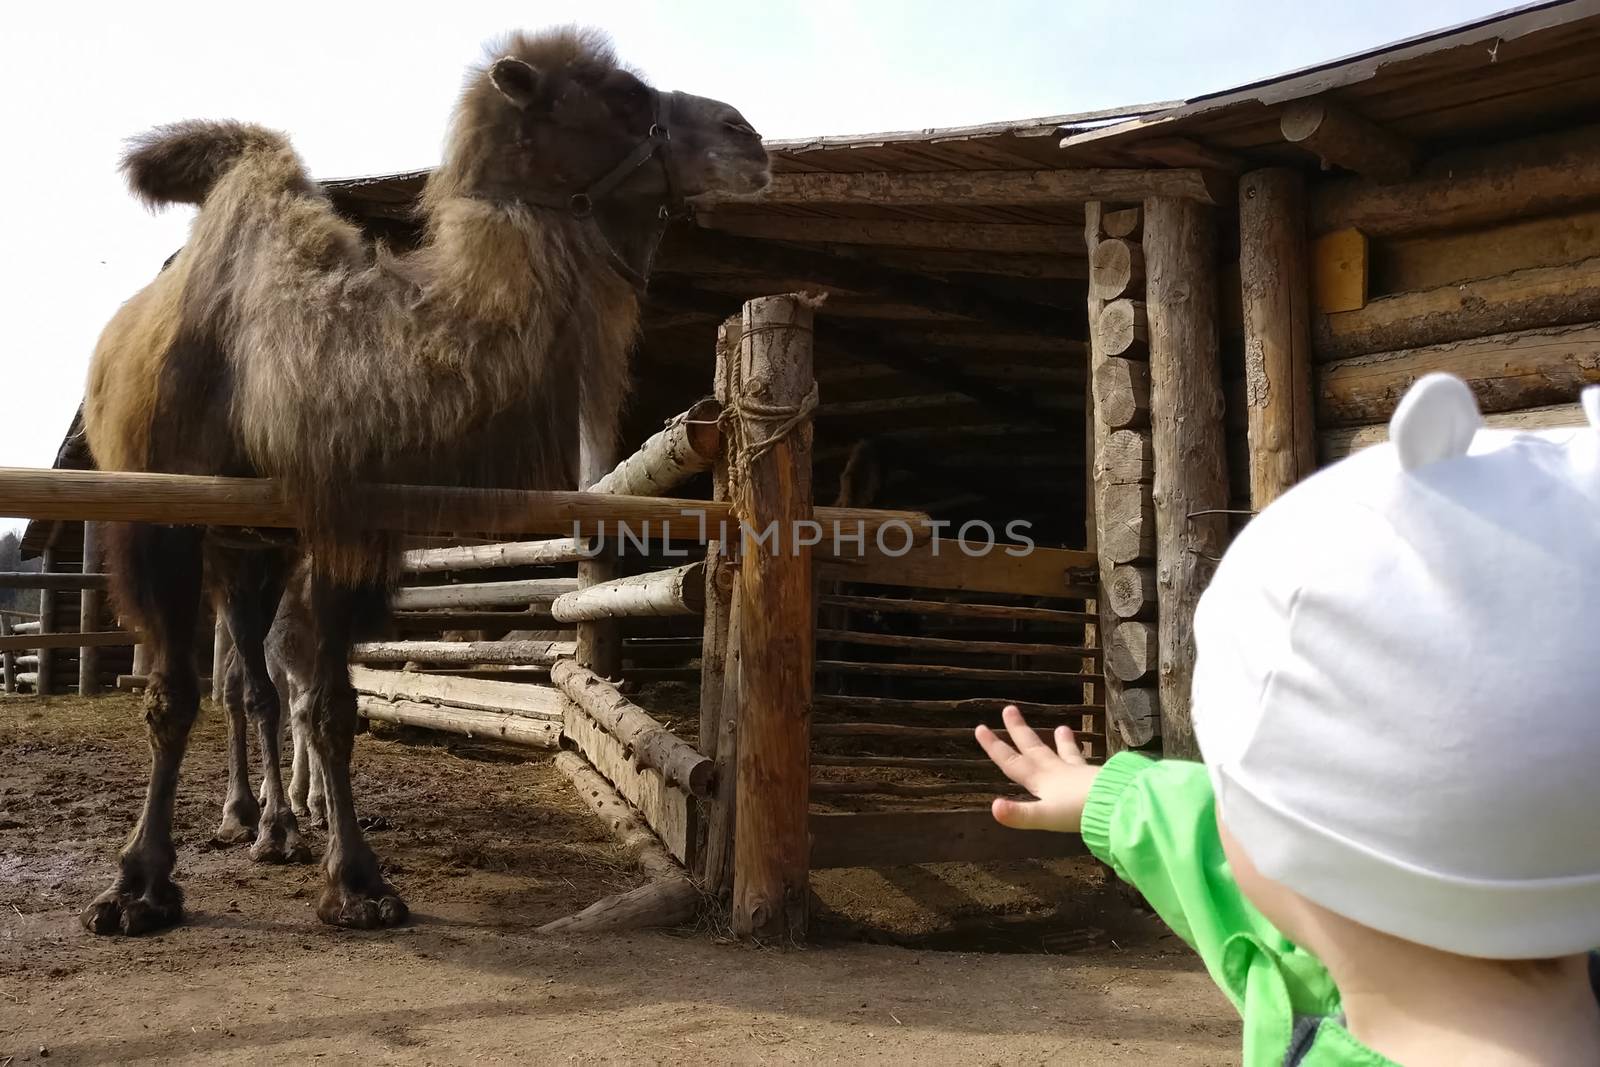 The child pulls his hand towards the camel. by DePo